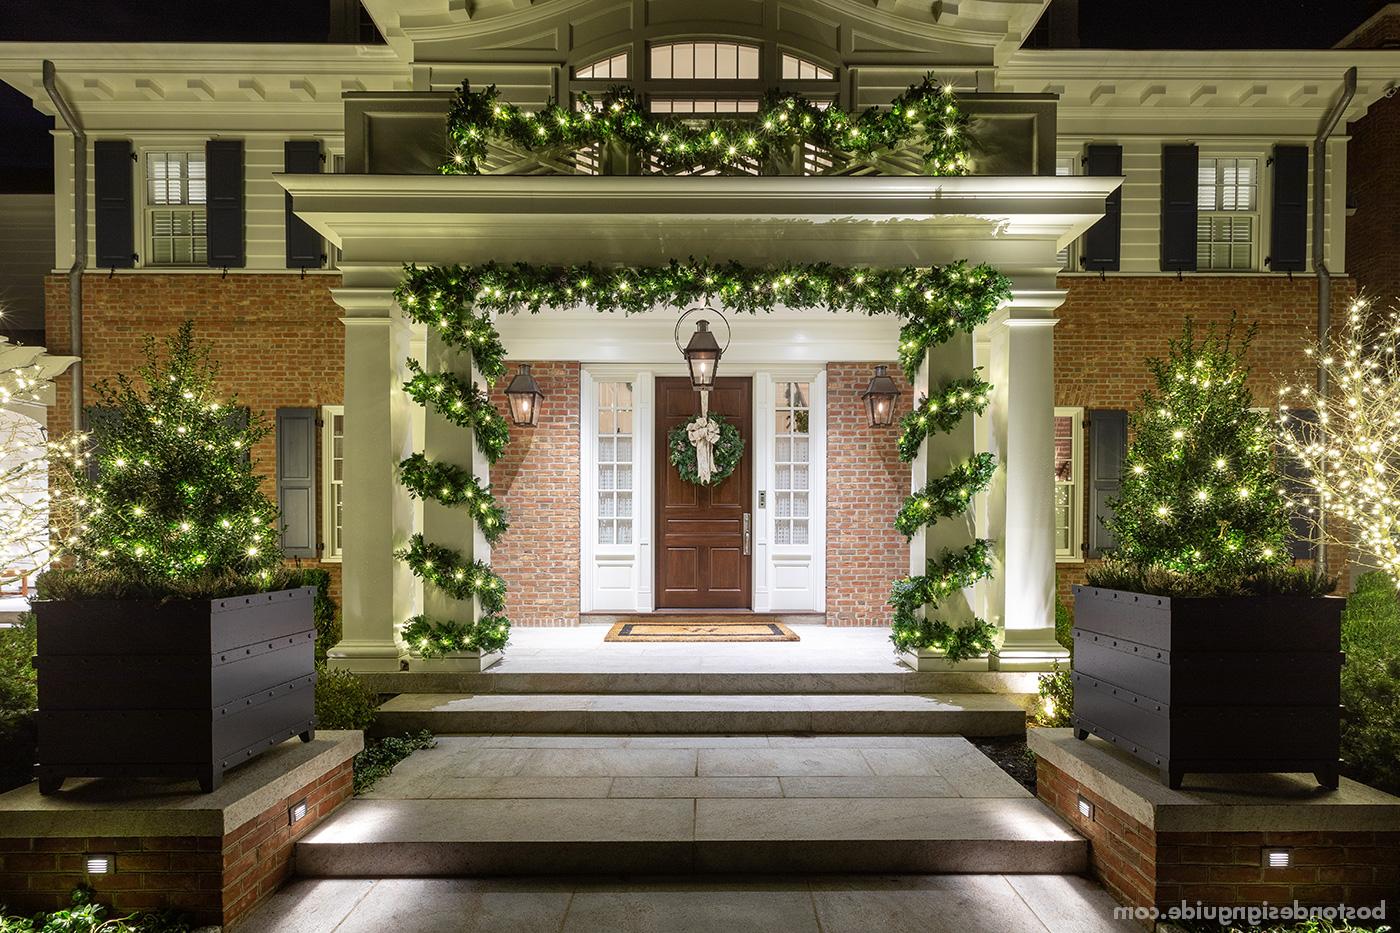 New England home dressed for the holidays by The Schumacher Companies 